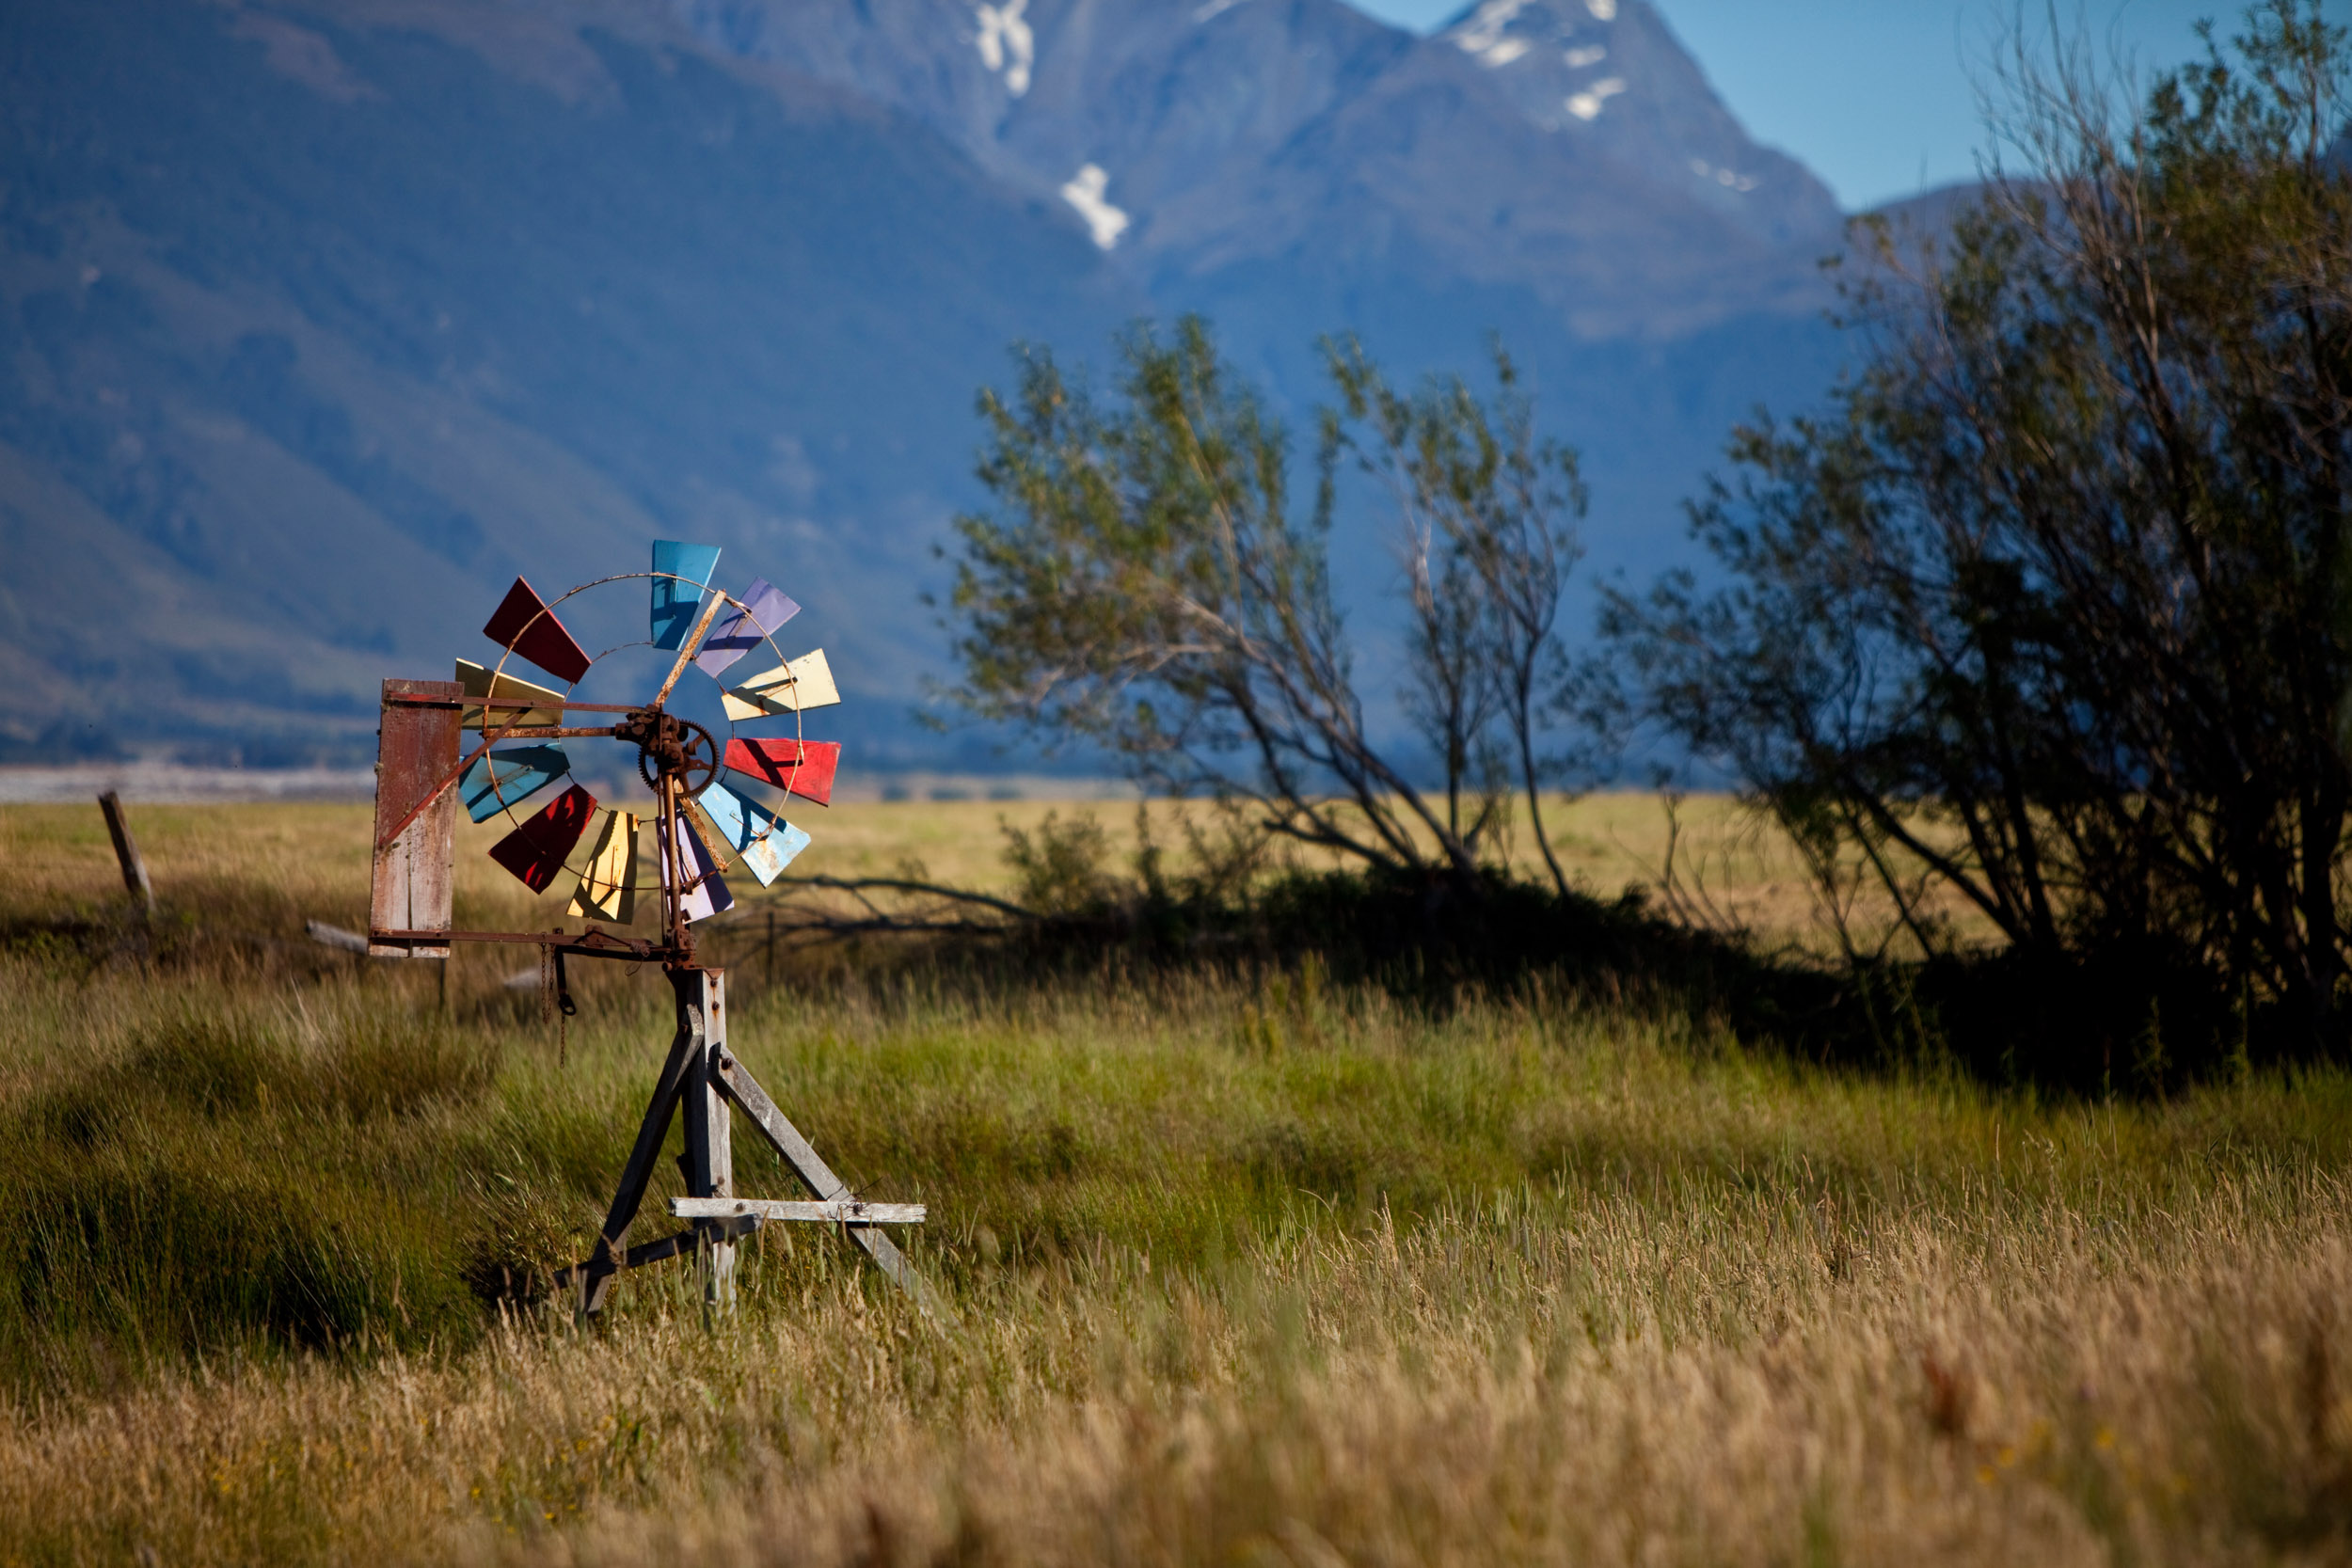 A multi-colored windmill waits for the wind against a mountainous backdrop in New Zealand’s south island